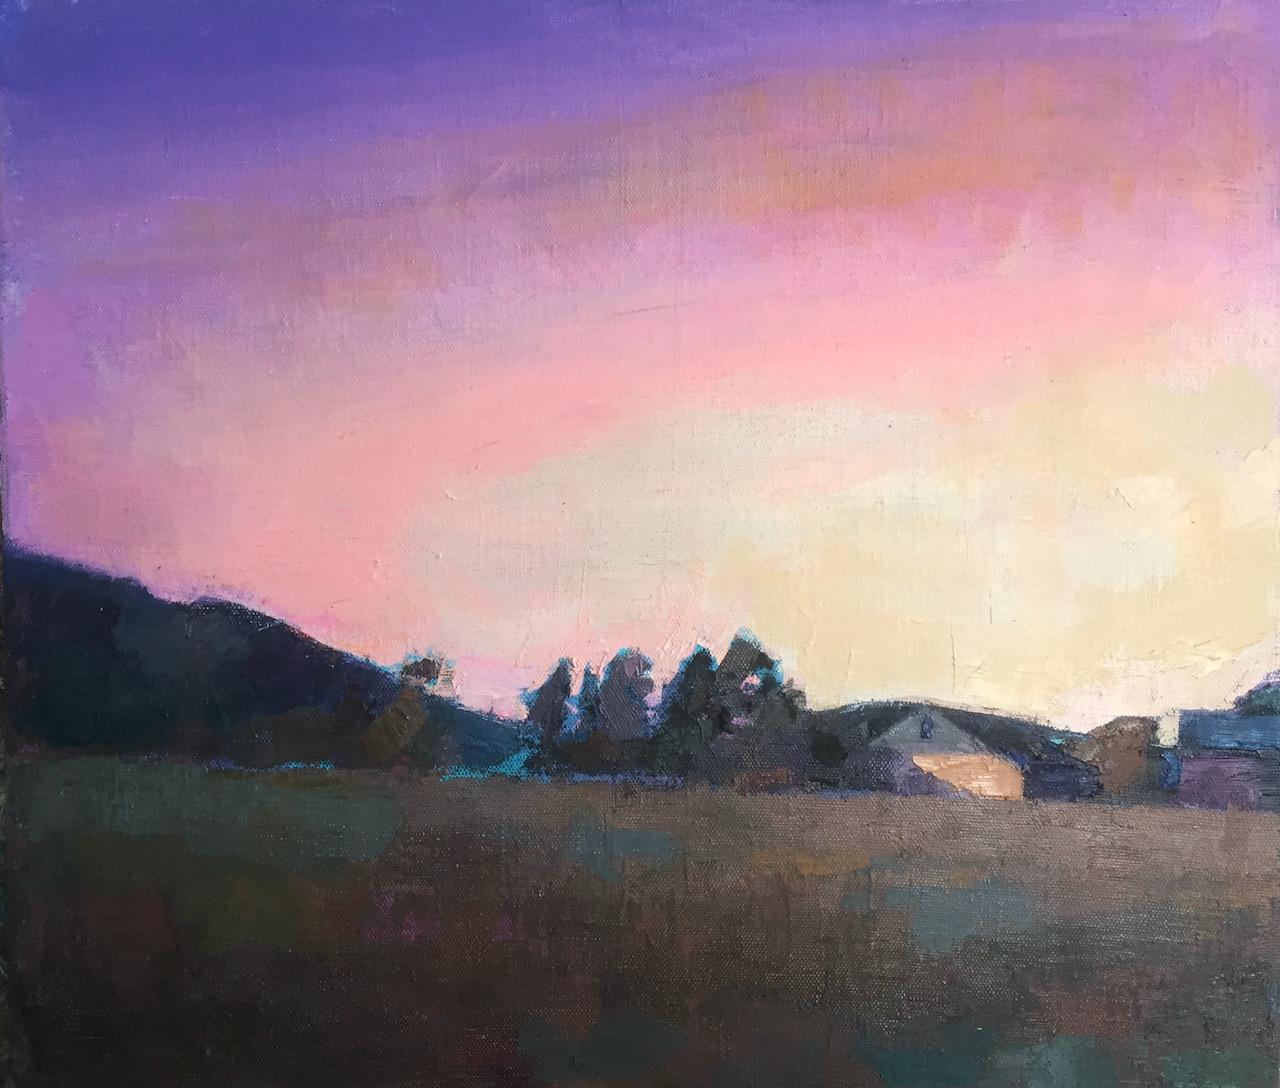 Larry Horowitz Landscape Painting - "Magenta Sky" oil painting of purple sunset over a field